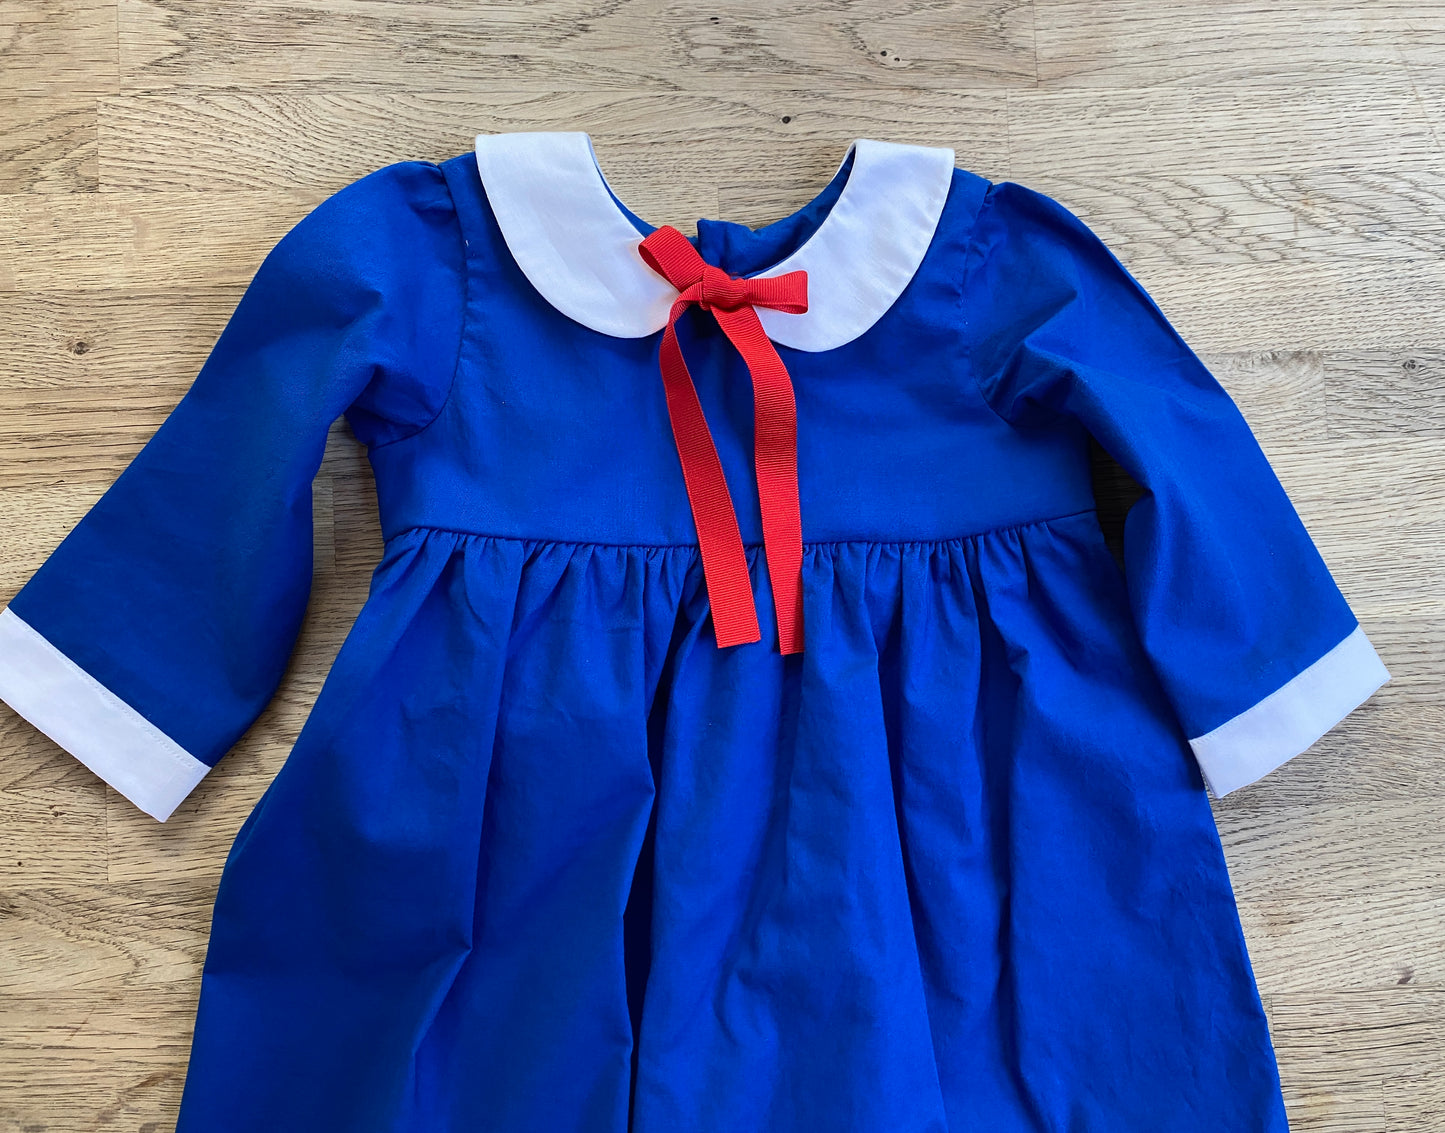 Royal Blue Madeline Inspired Dress with Peter Pan Collar (MADE TO ORDER)